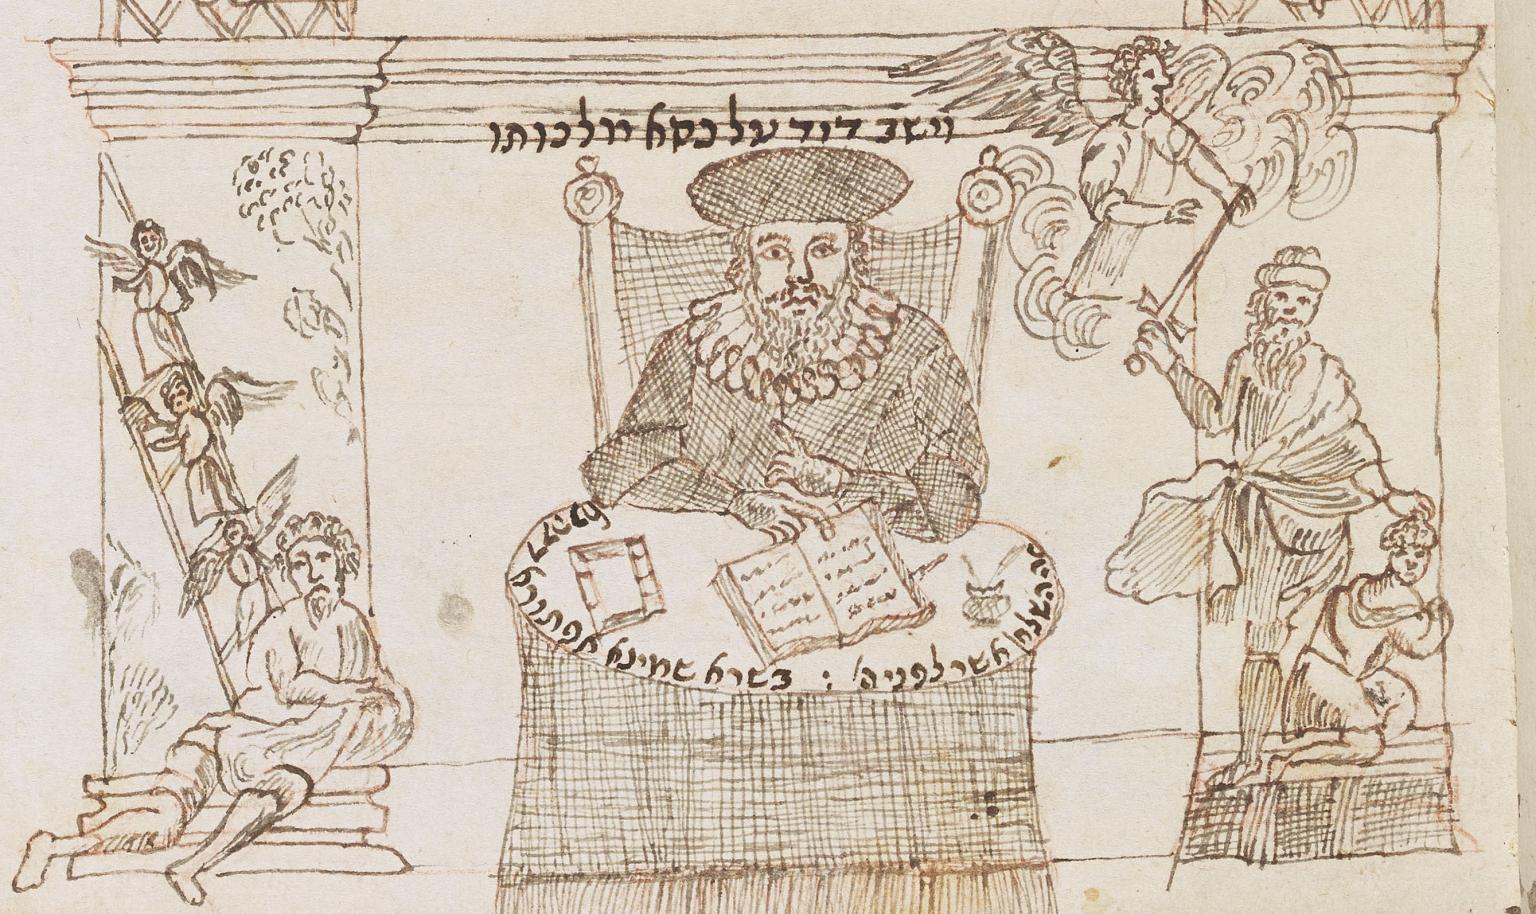 Drawing of bearded man wearing collar and hat seated at table with books, framed by two columns with images of angels, and Hebrew text above his head.